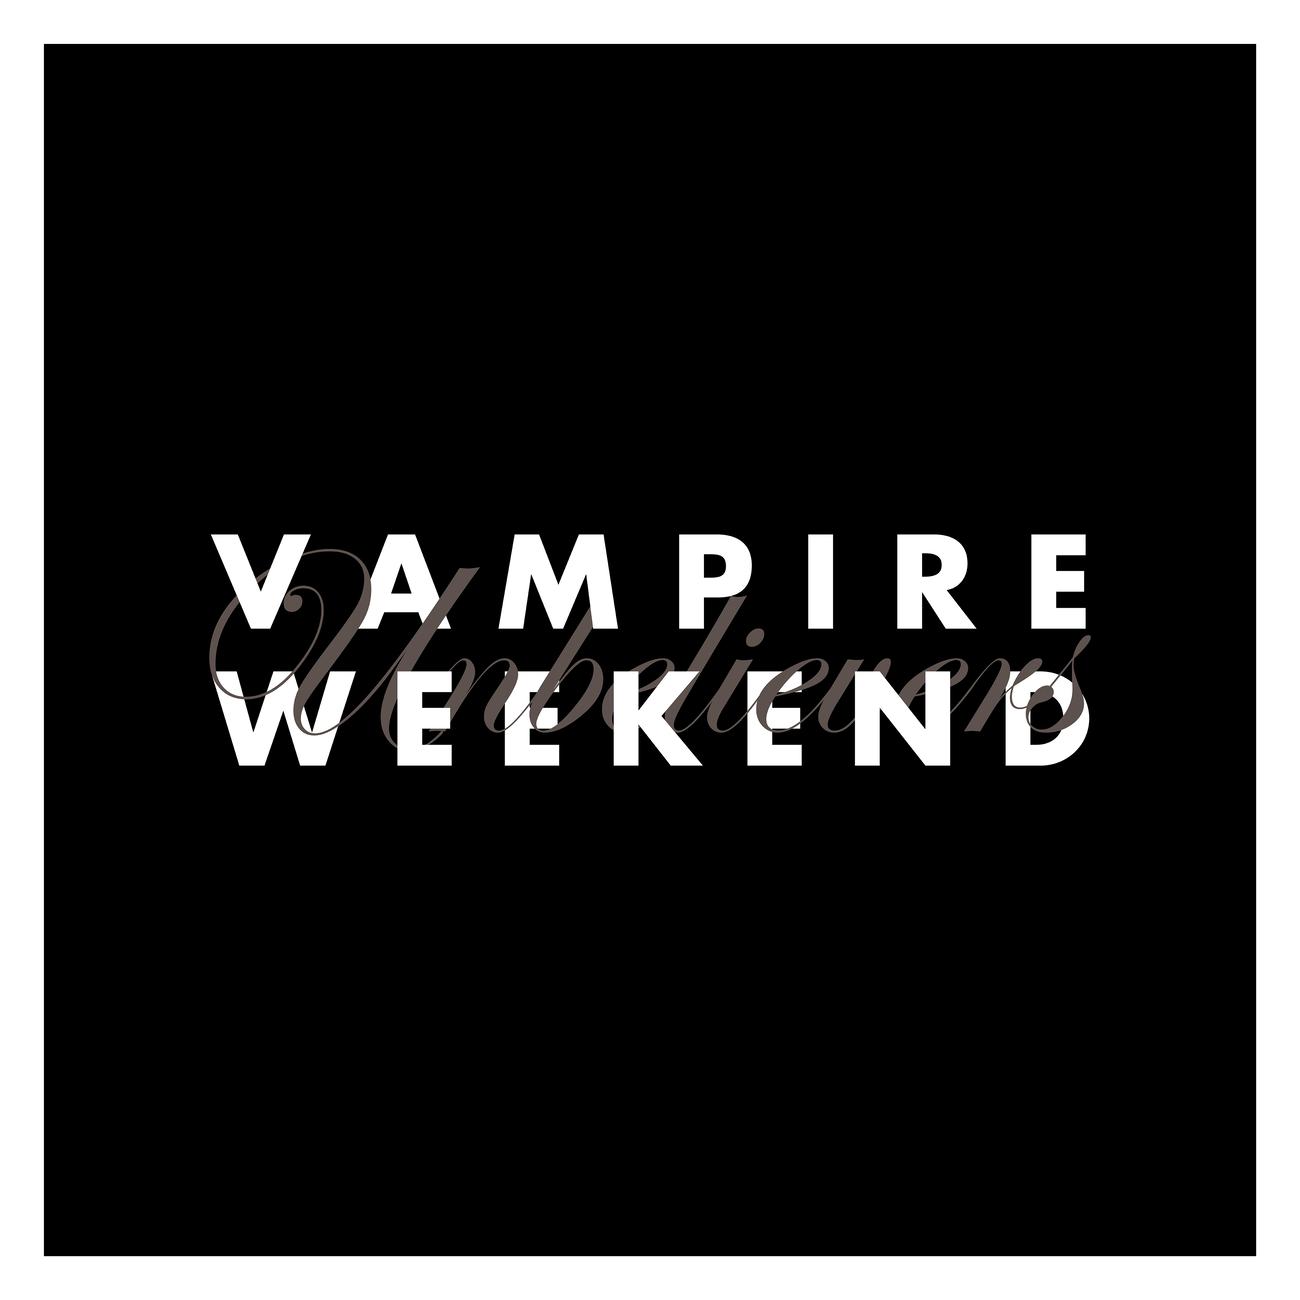 Vampire weekend only god was above us. Vampire weekend "contra". Vampire weekend logo. Campus Vampire weekend. Vampire weekend Modern Vampires of the City обложка.